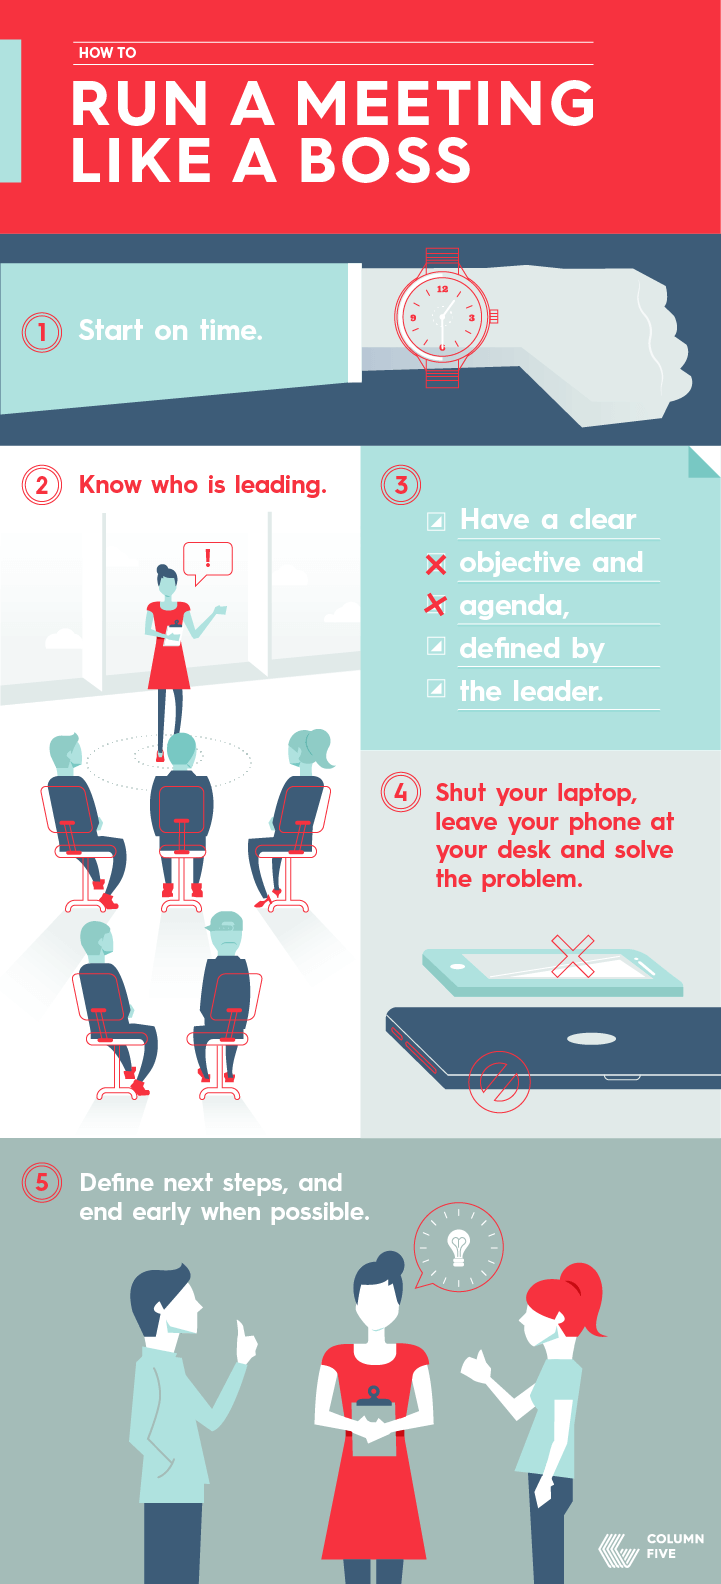 How to run a meeting like a boss infographic